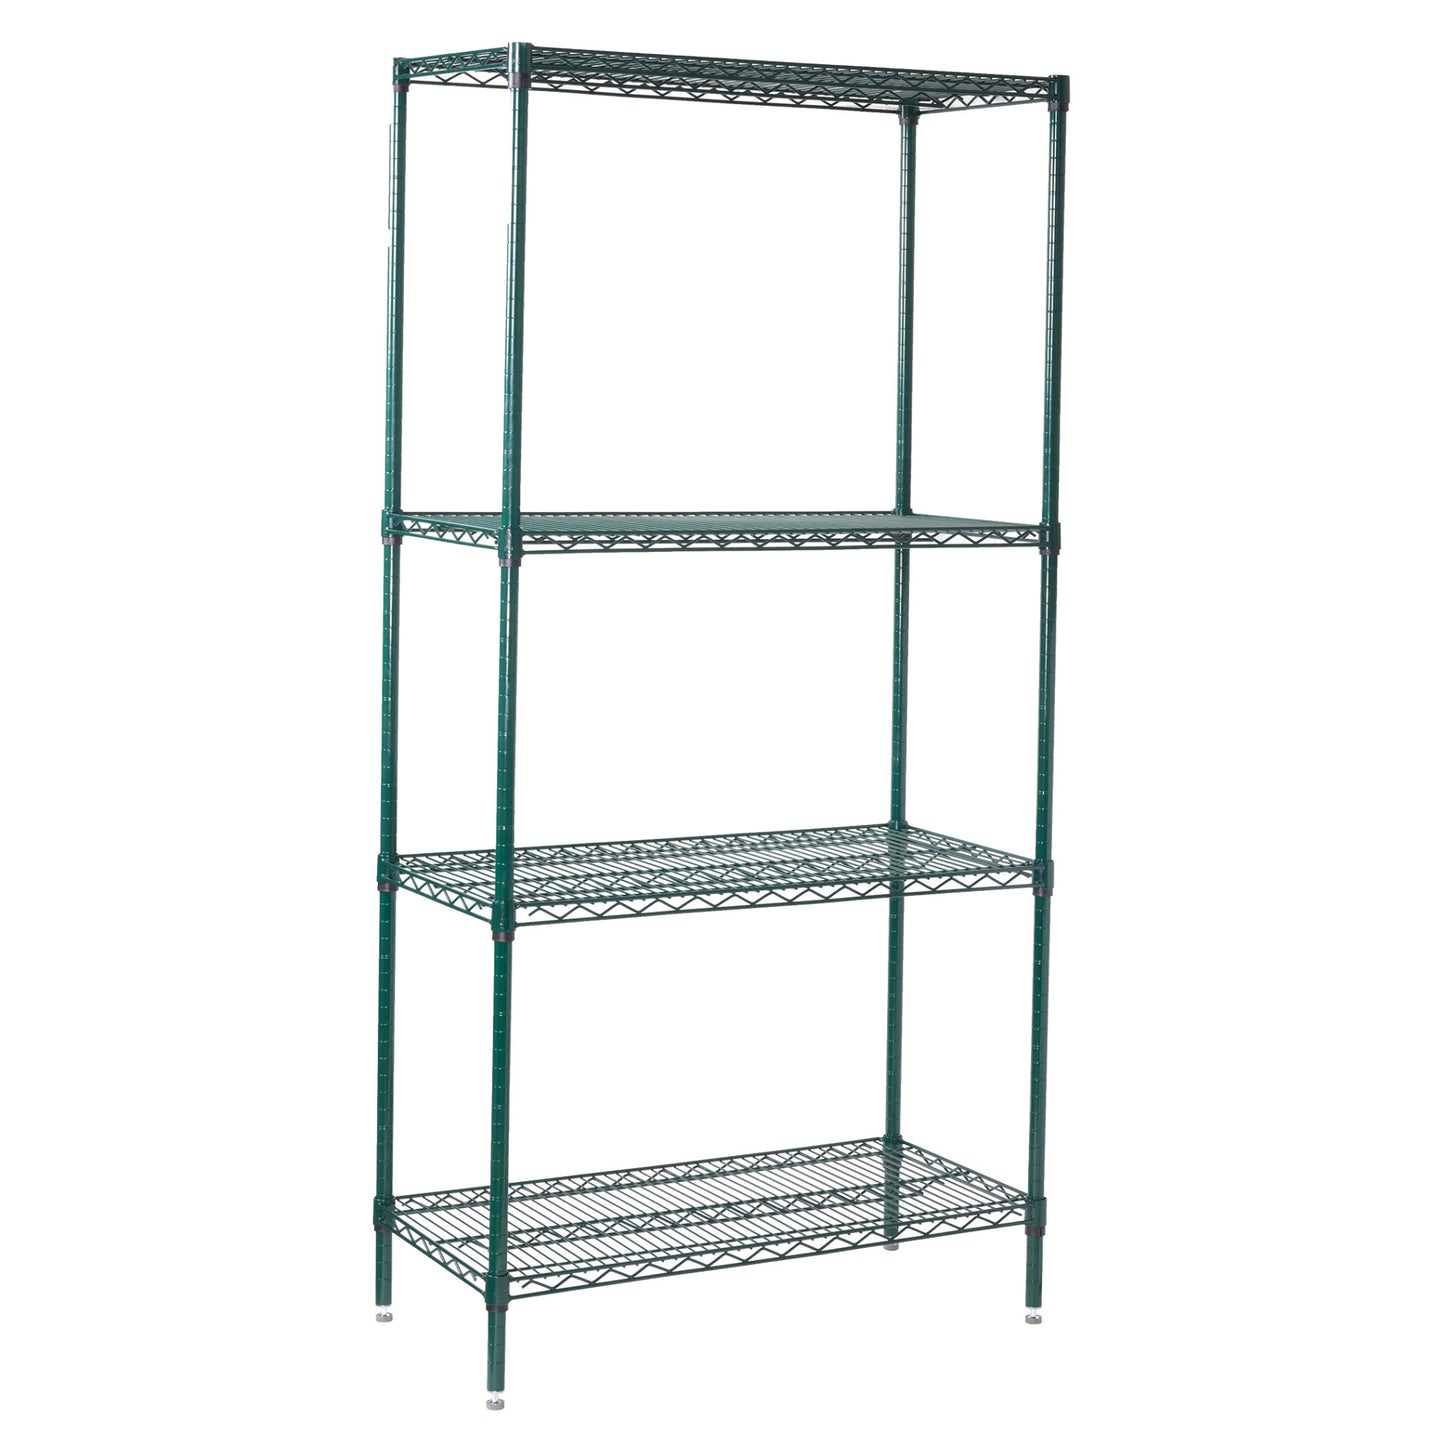 VEXS-1848 - 4-Tier Wire Shelving Set, Epoxy-Coated - 18 x 48 x 72